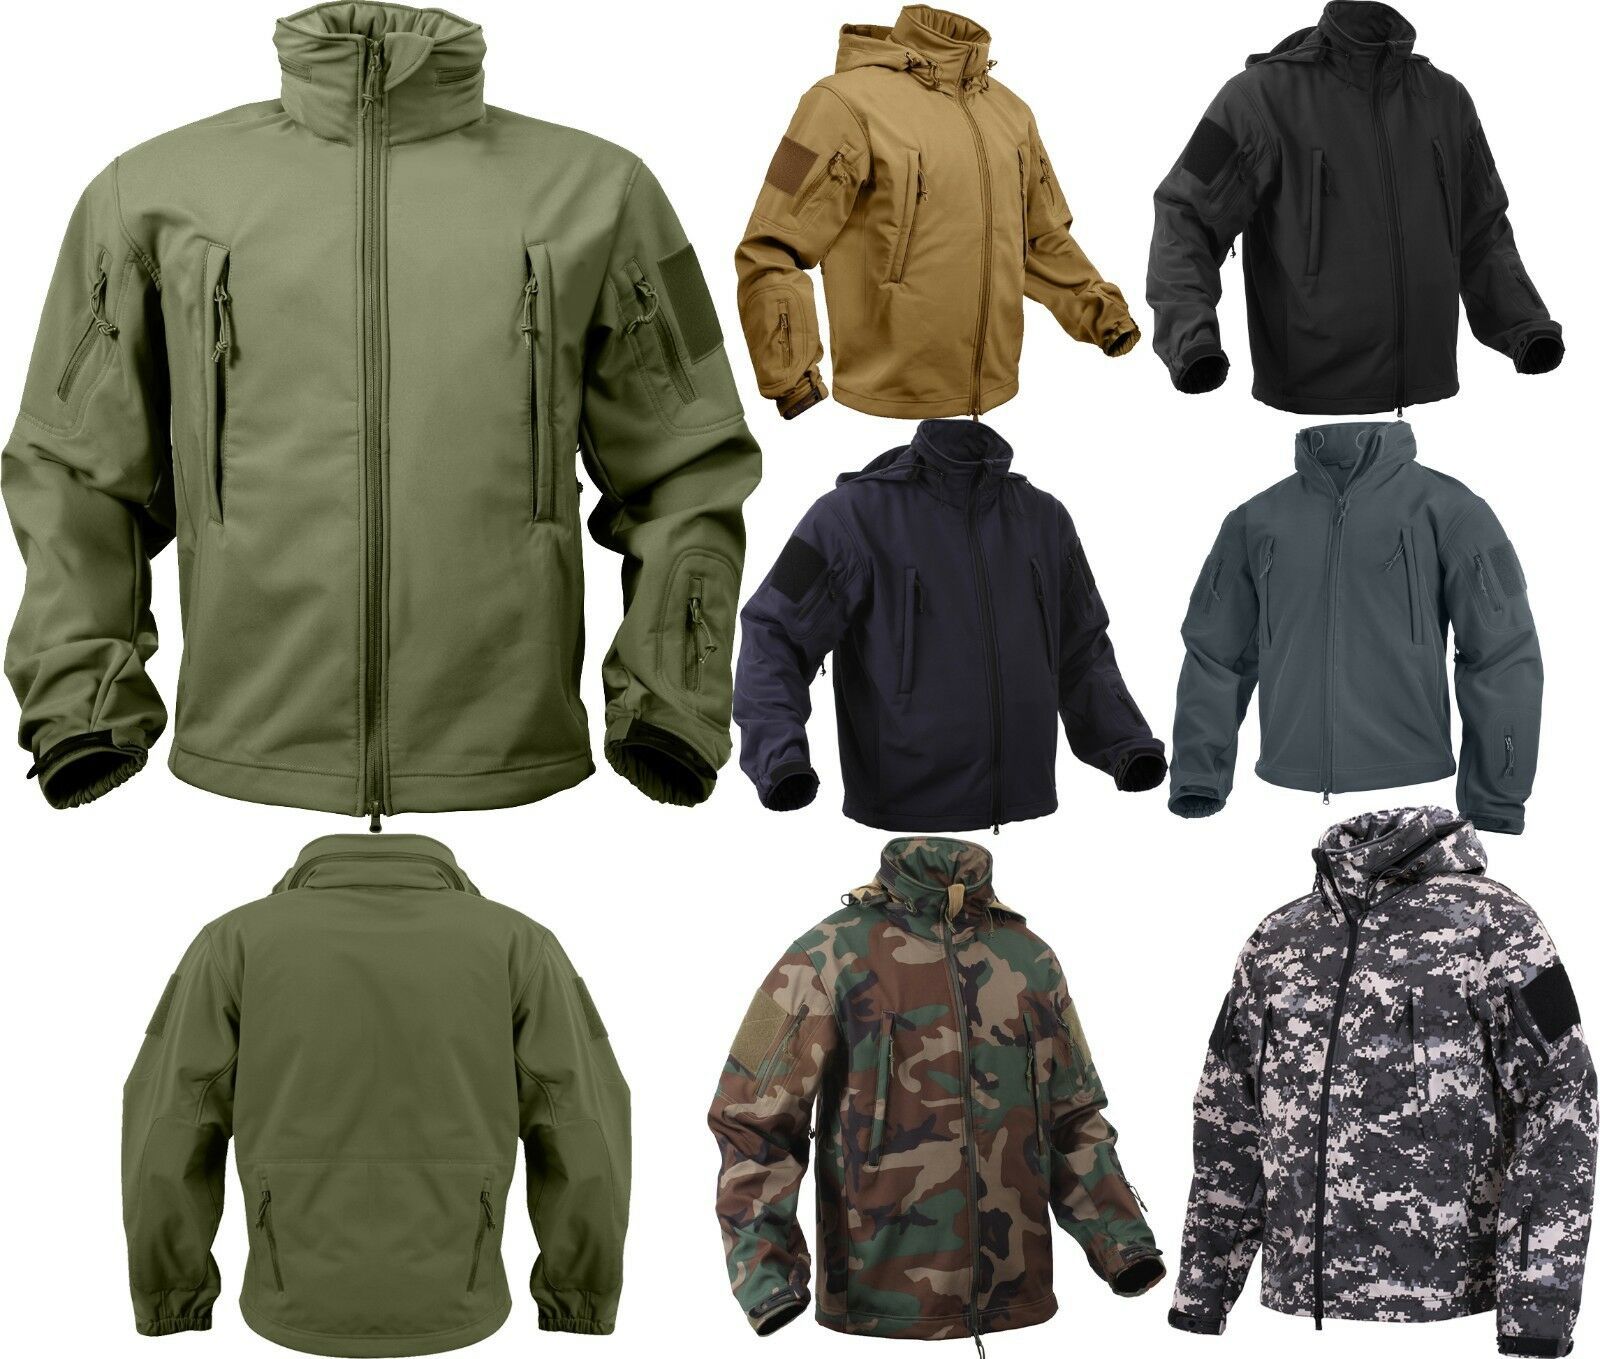 Tactical Soft Shell Waterproof Jacket Fleece Lined Military Army Hooded ...